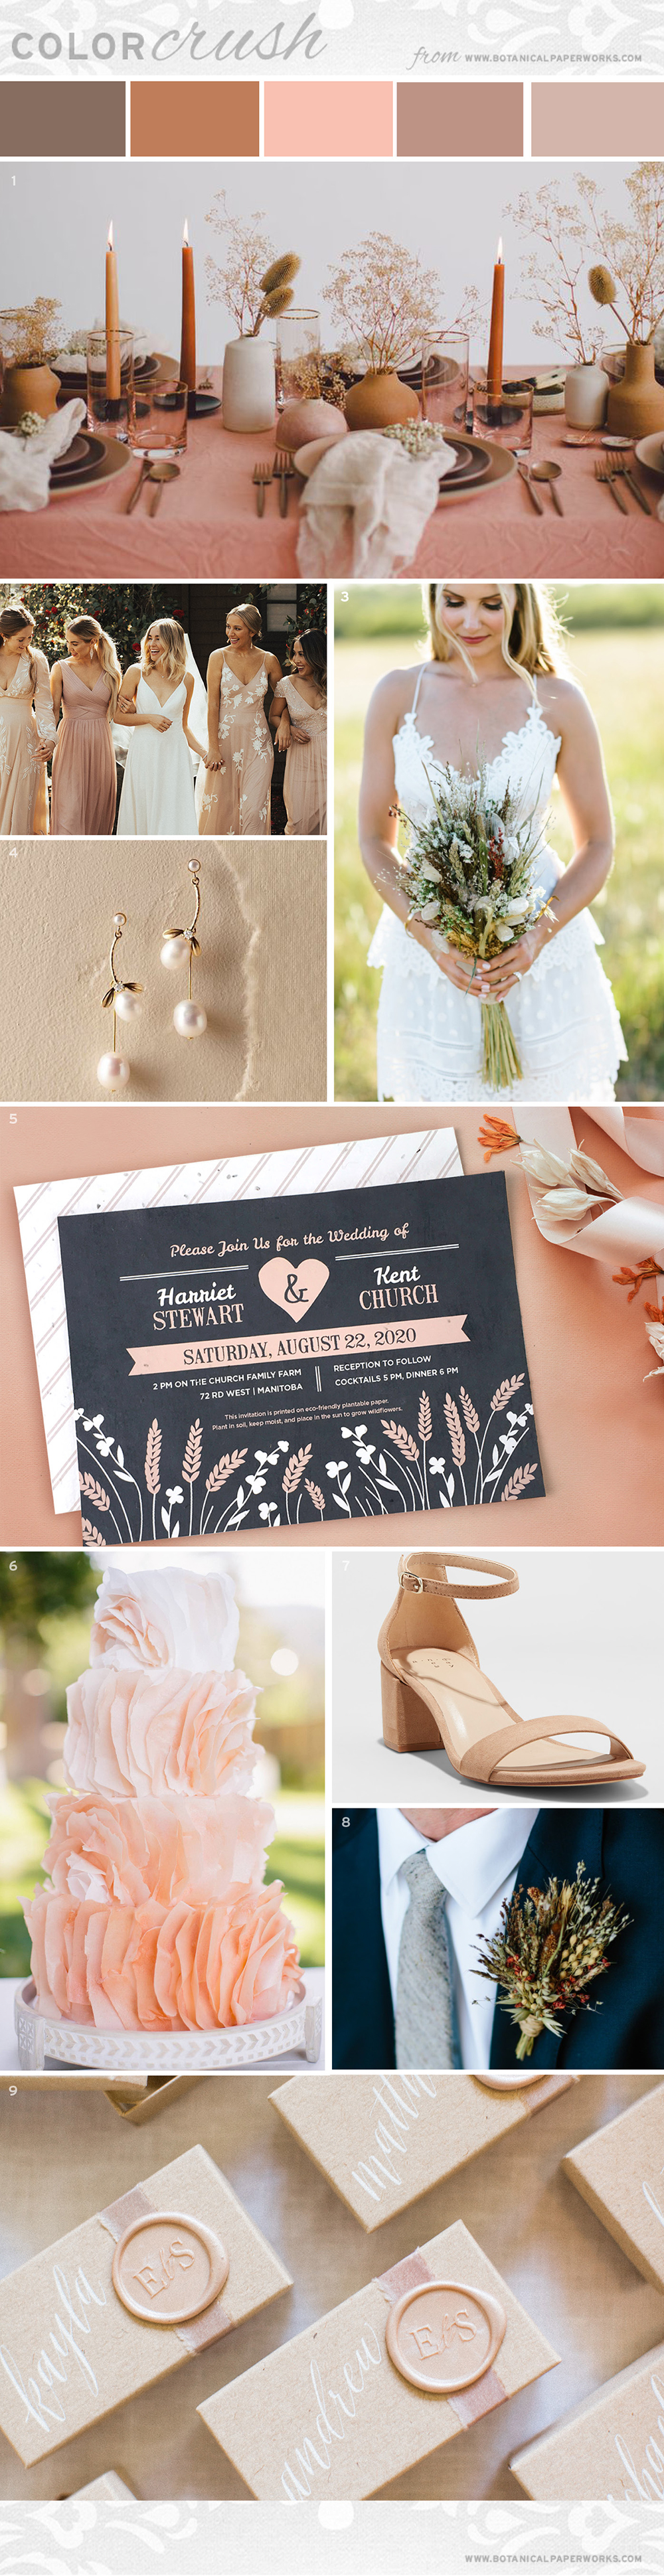 This trendy prairie wedding inspiration combines dusty pink with ochre and features dried flowers and grasses to create an earthy look your guests will love.